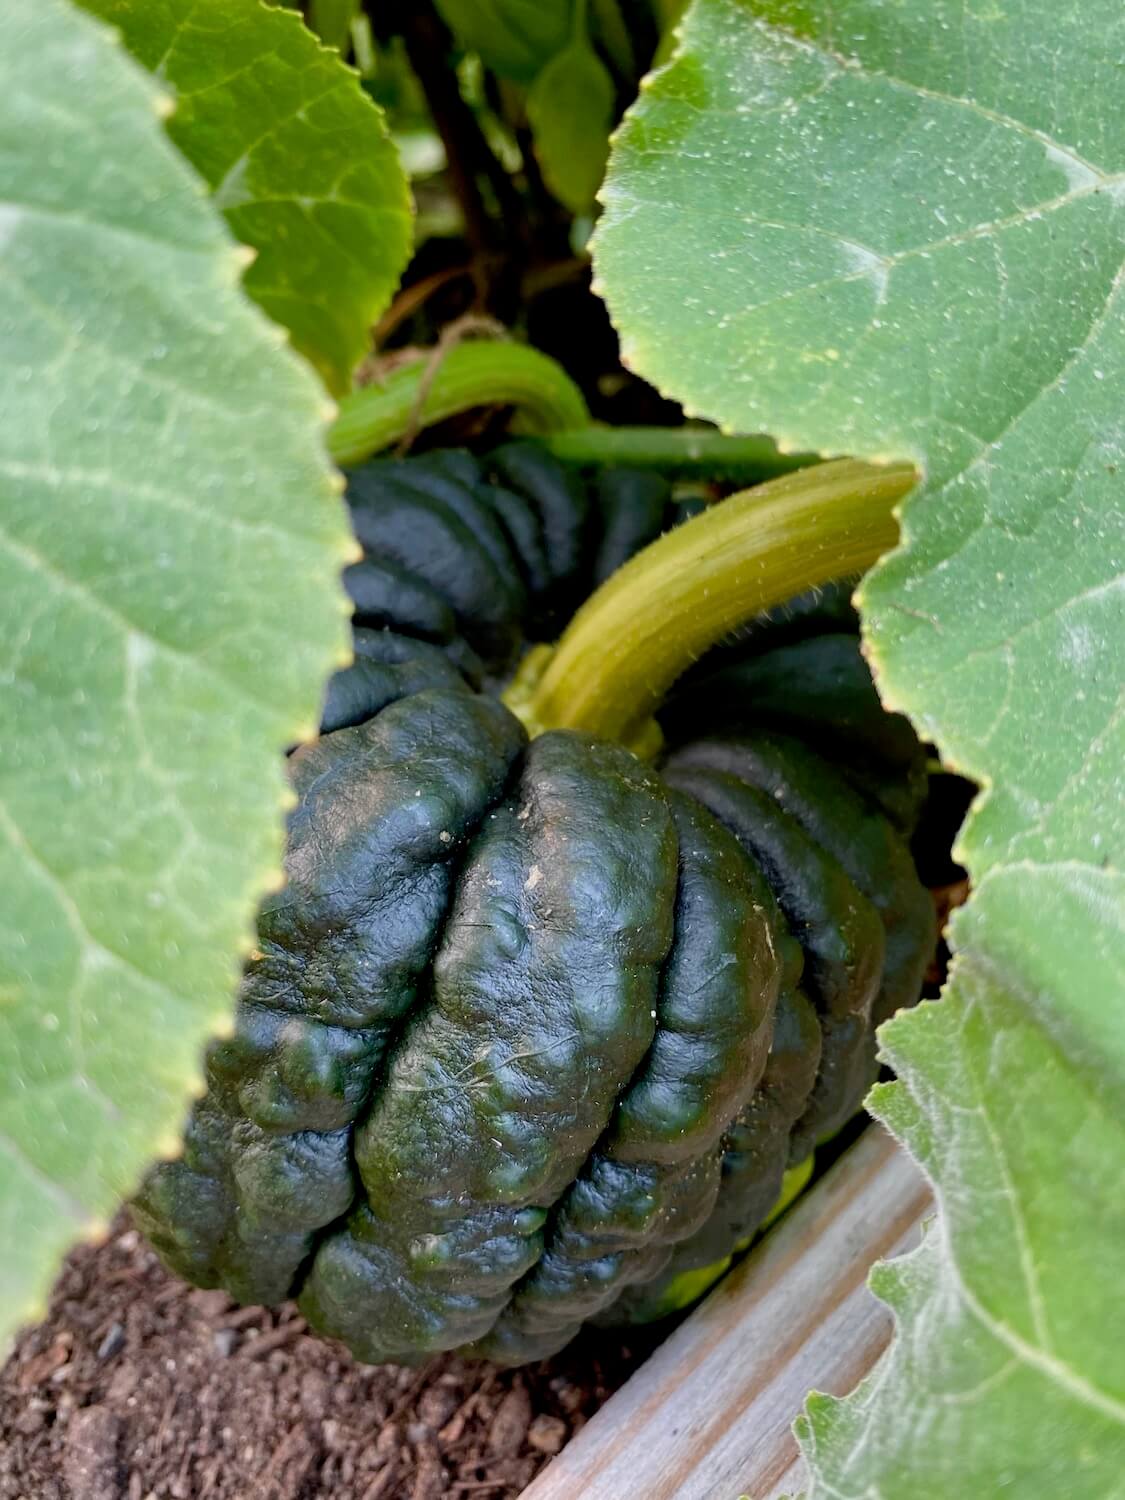 An acorn squash is hiding behind several large veiny green leaves and sits on some rich black colored dirt. The stem is a olive green color and the squash leans up against the board of the raised planter bed of the garden.